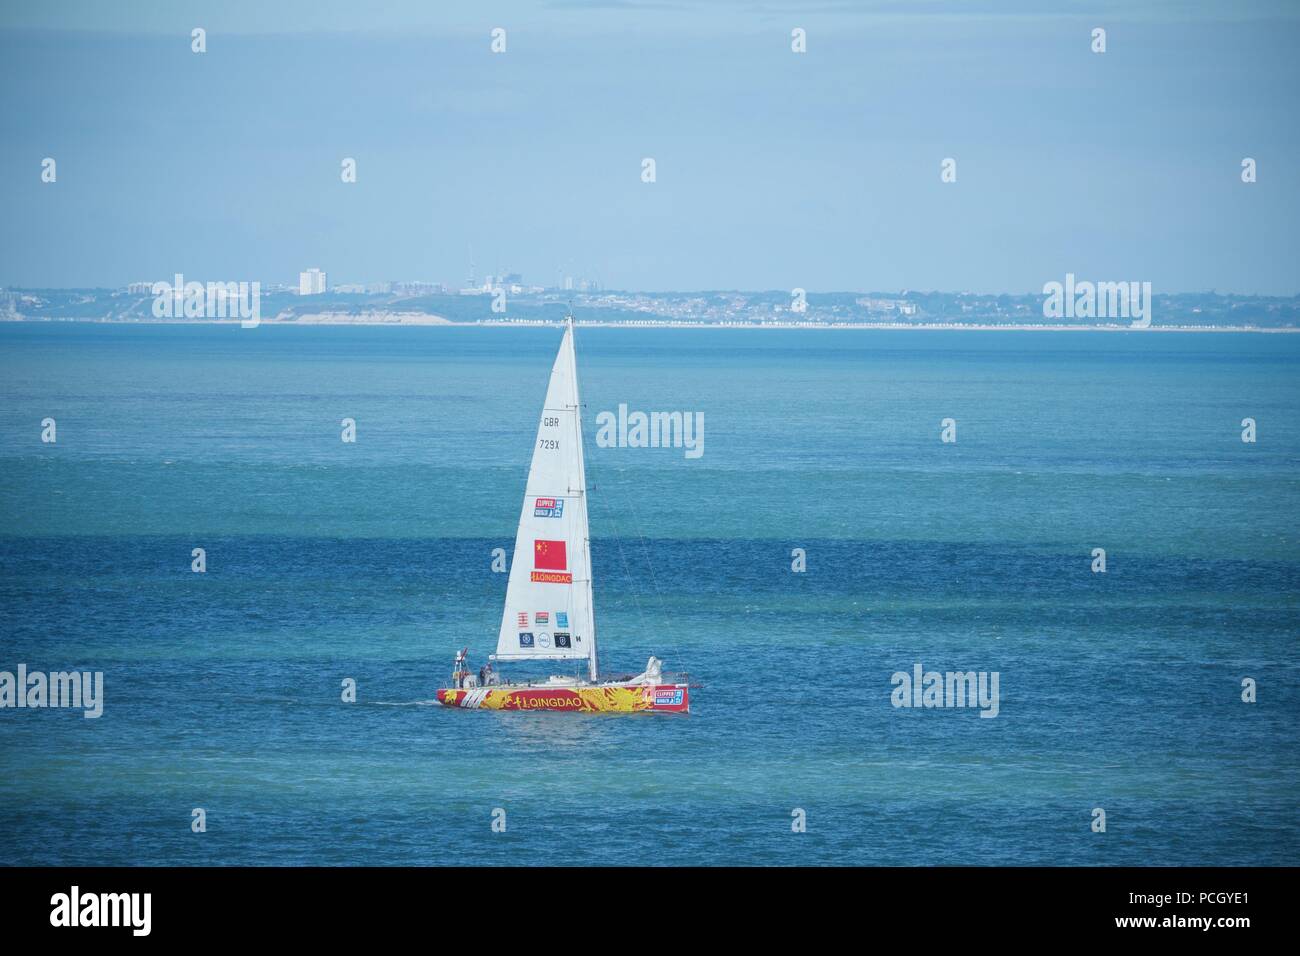 Sanyaz GBR 727X Sailing up the Solent to Cowes for Lendy Cowes Week 2018. Bournemouth can be seen beyond. Stock Photo